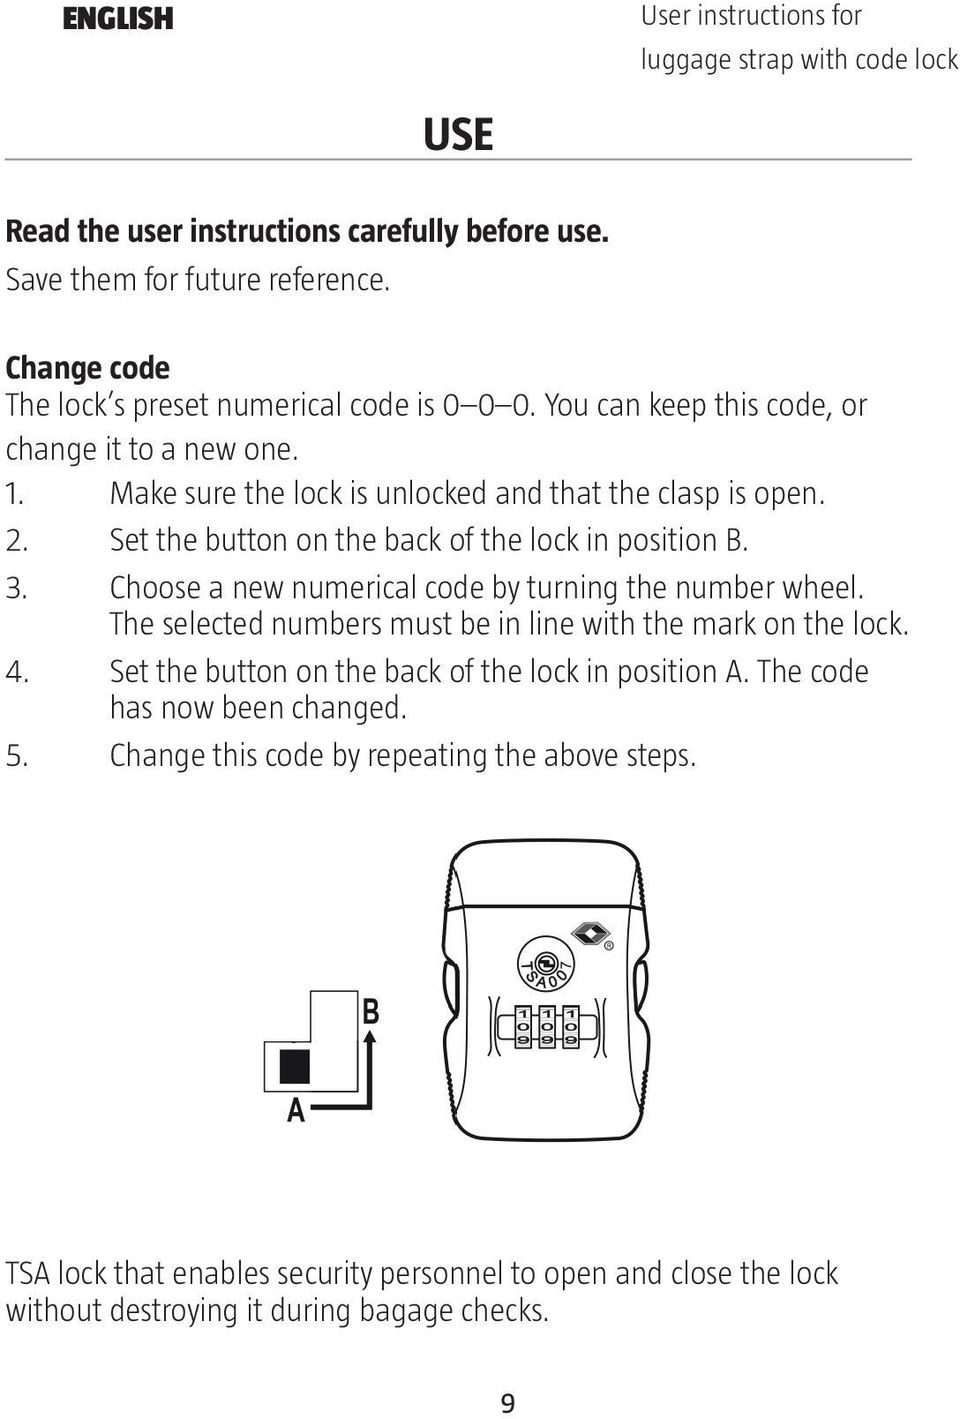 Set the button on the back of the lock in position B. 3. Choose a new numerical code by turning the number wheel. The selected numbers must be in line with the mark on the lock. 4.